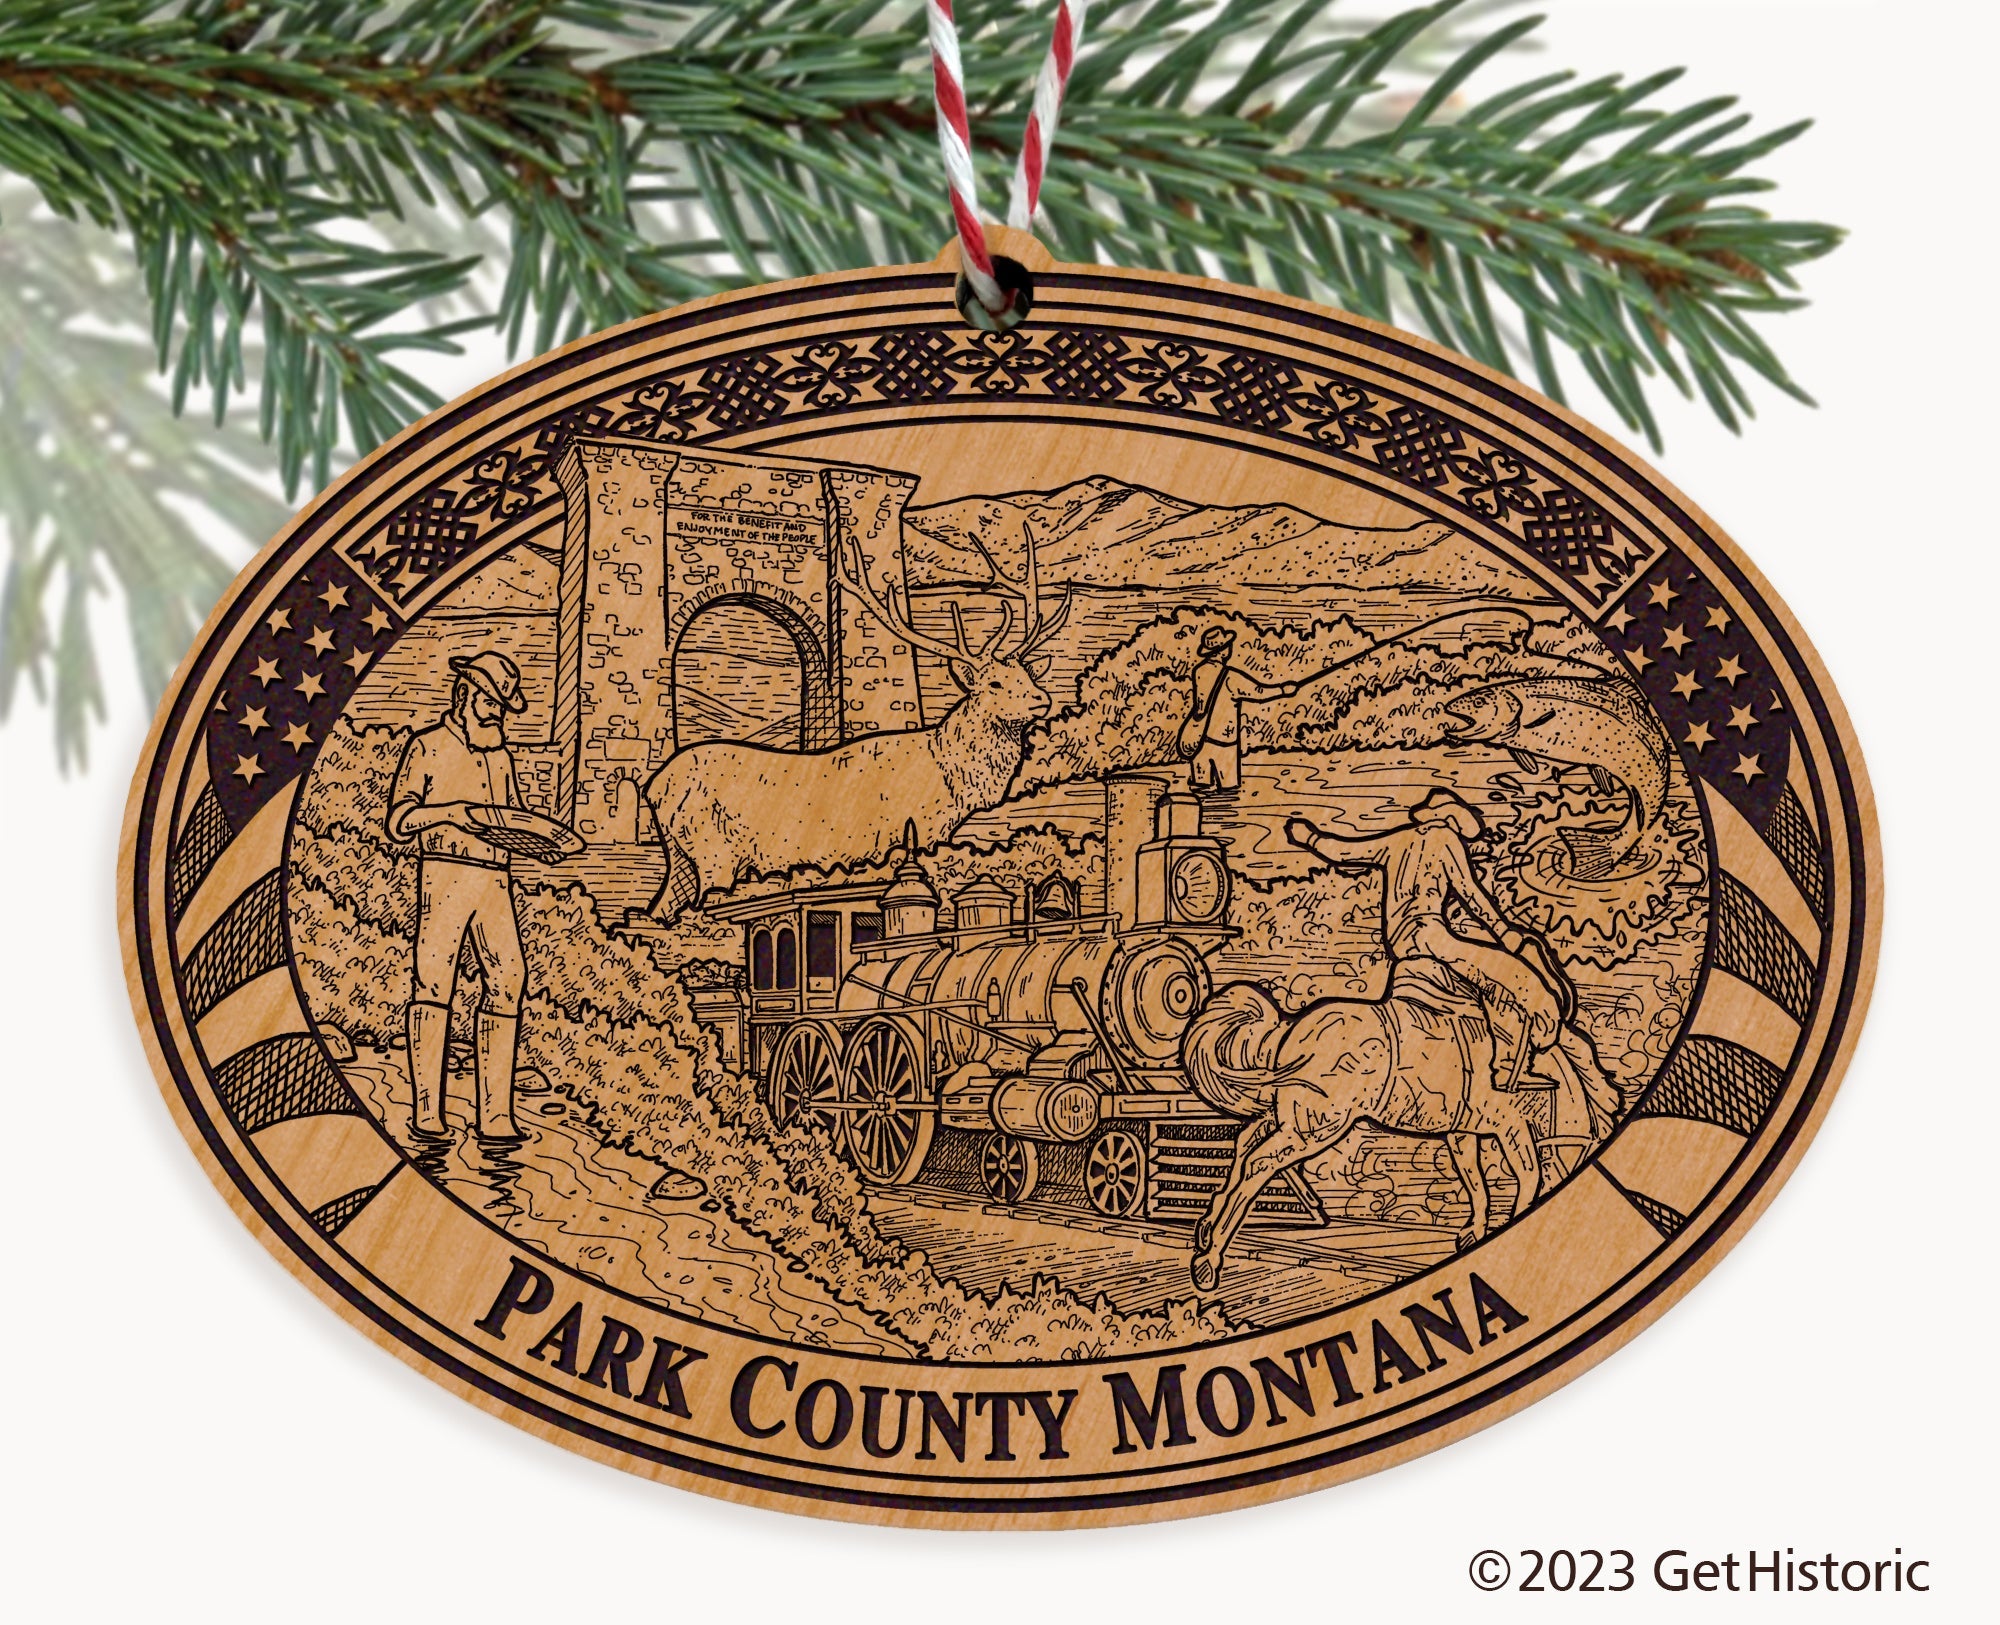 Park County Montana Engraved Natural Ornament